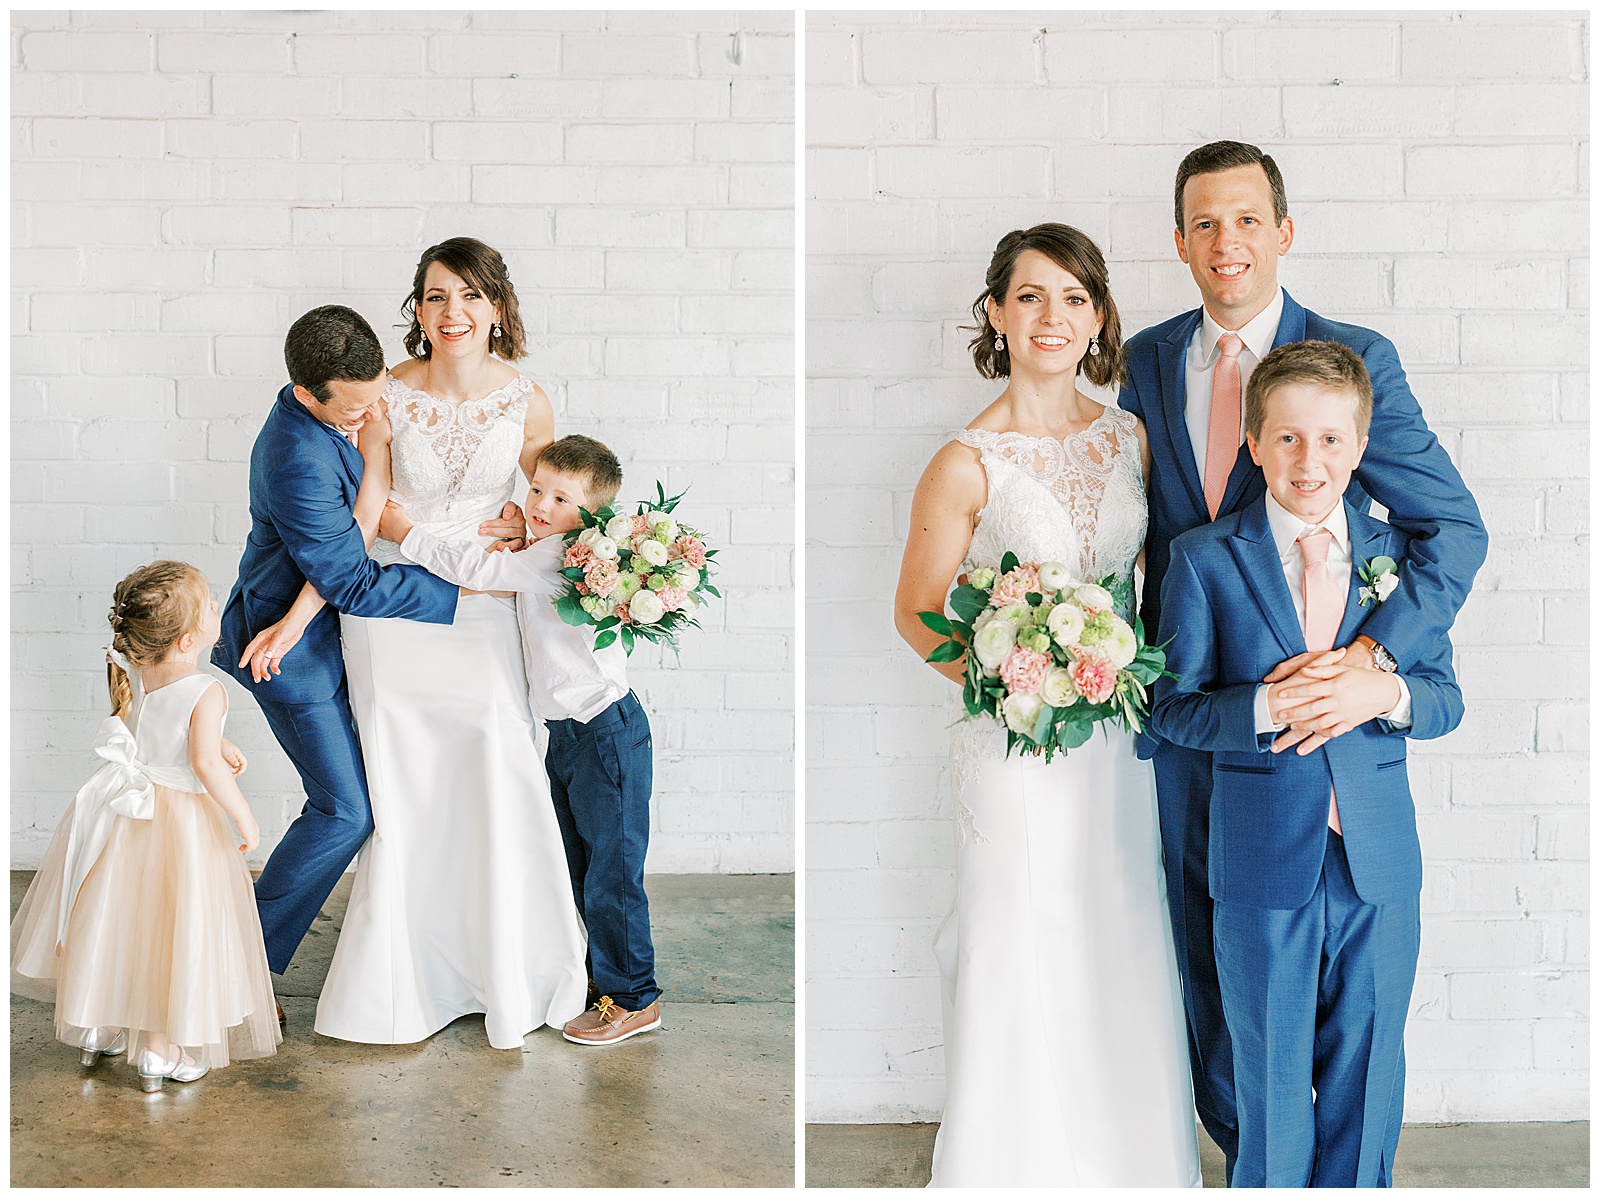 adorable shot with flower girl and ring bearer from indoor summer bride groom portraits of short brown haired bride in lace dress with long train and navy blue suited groom